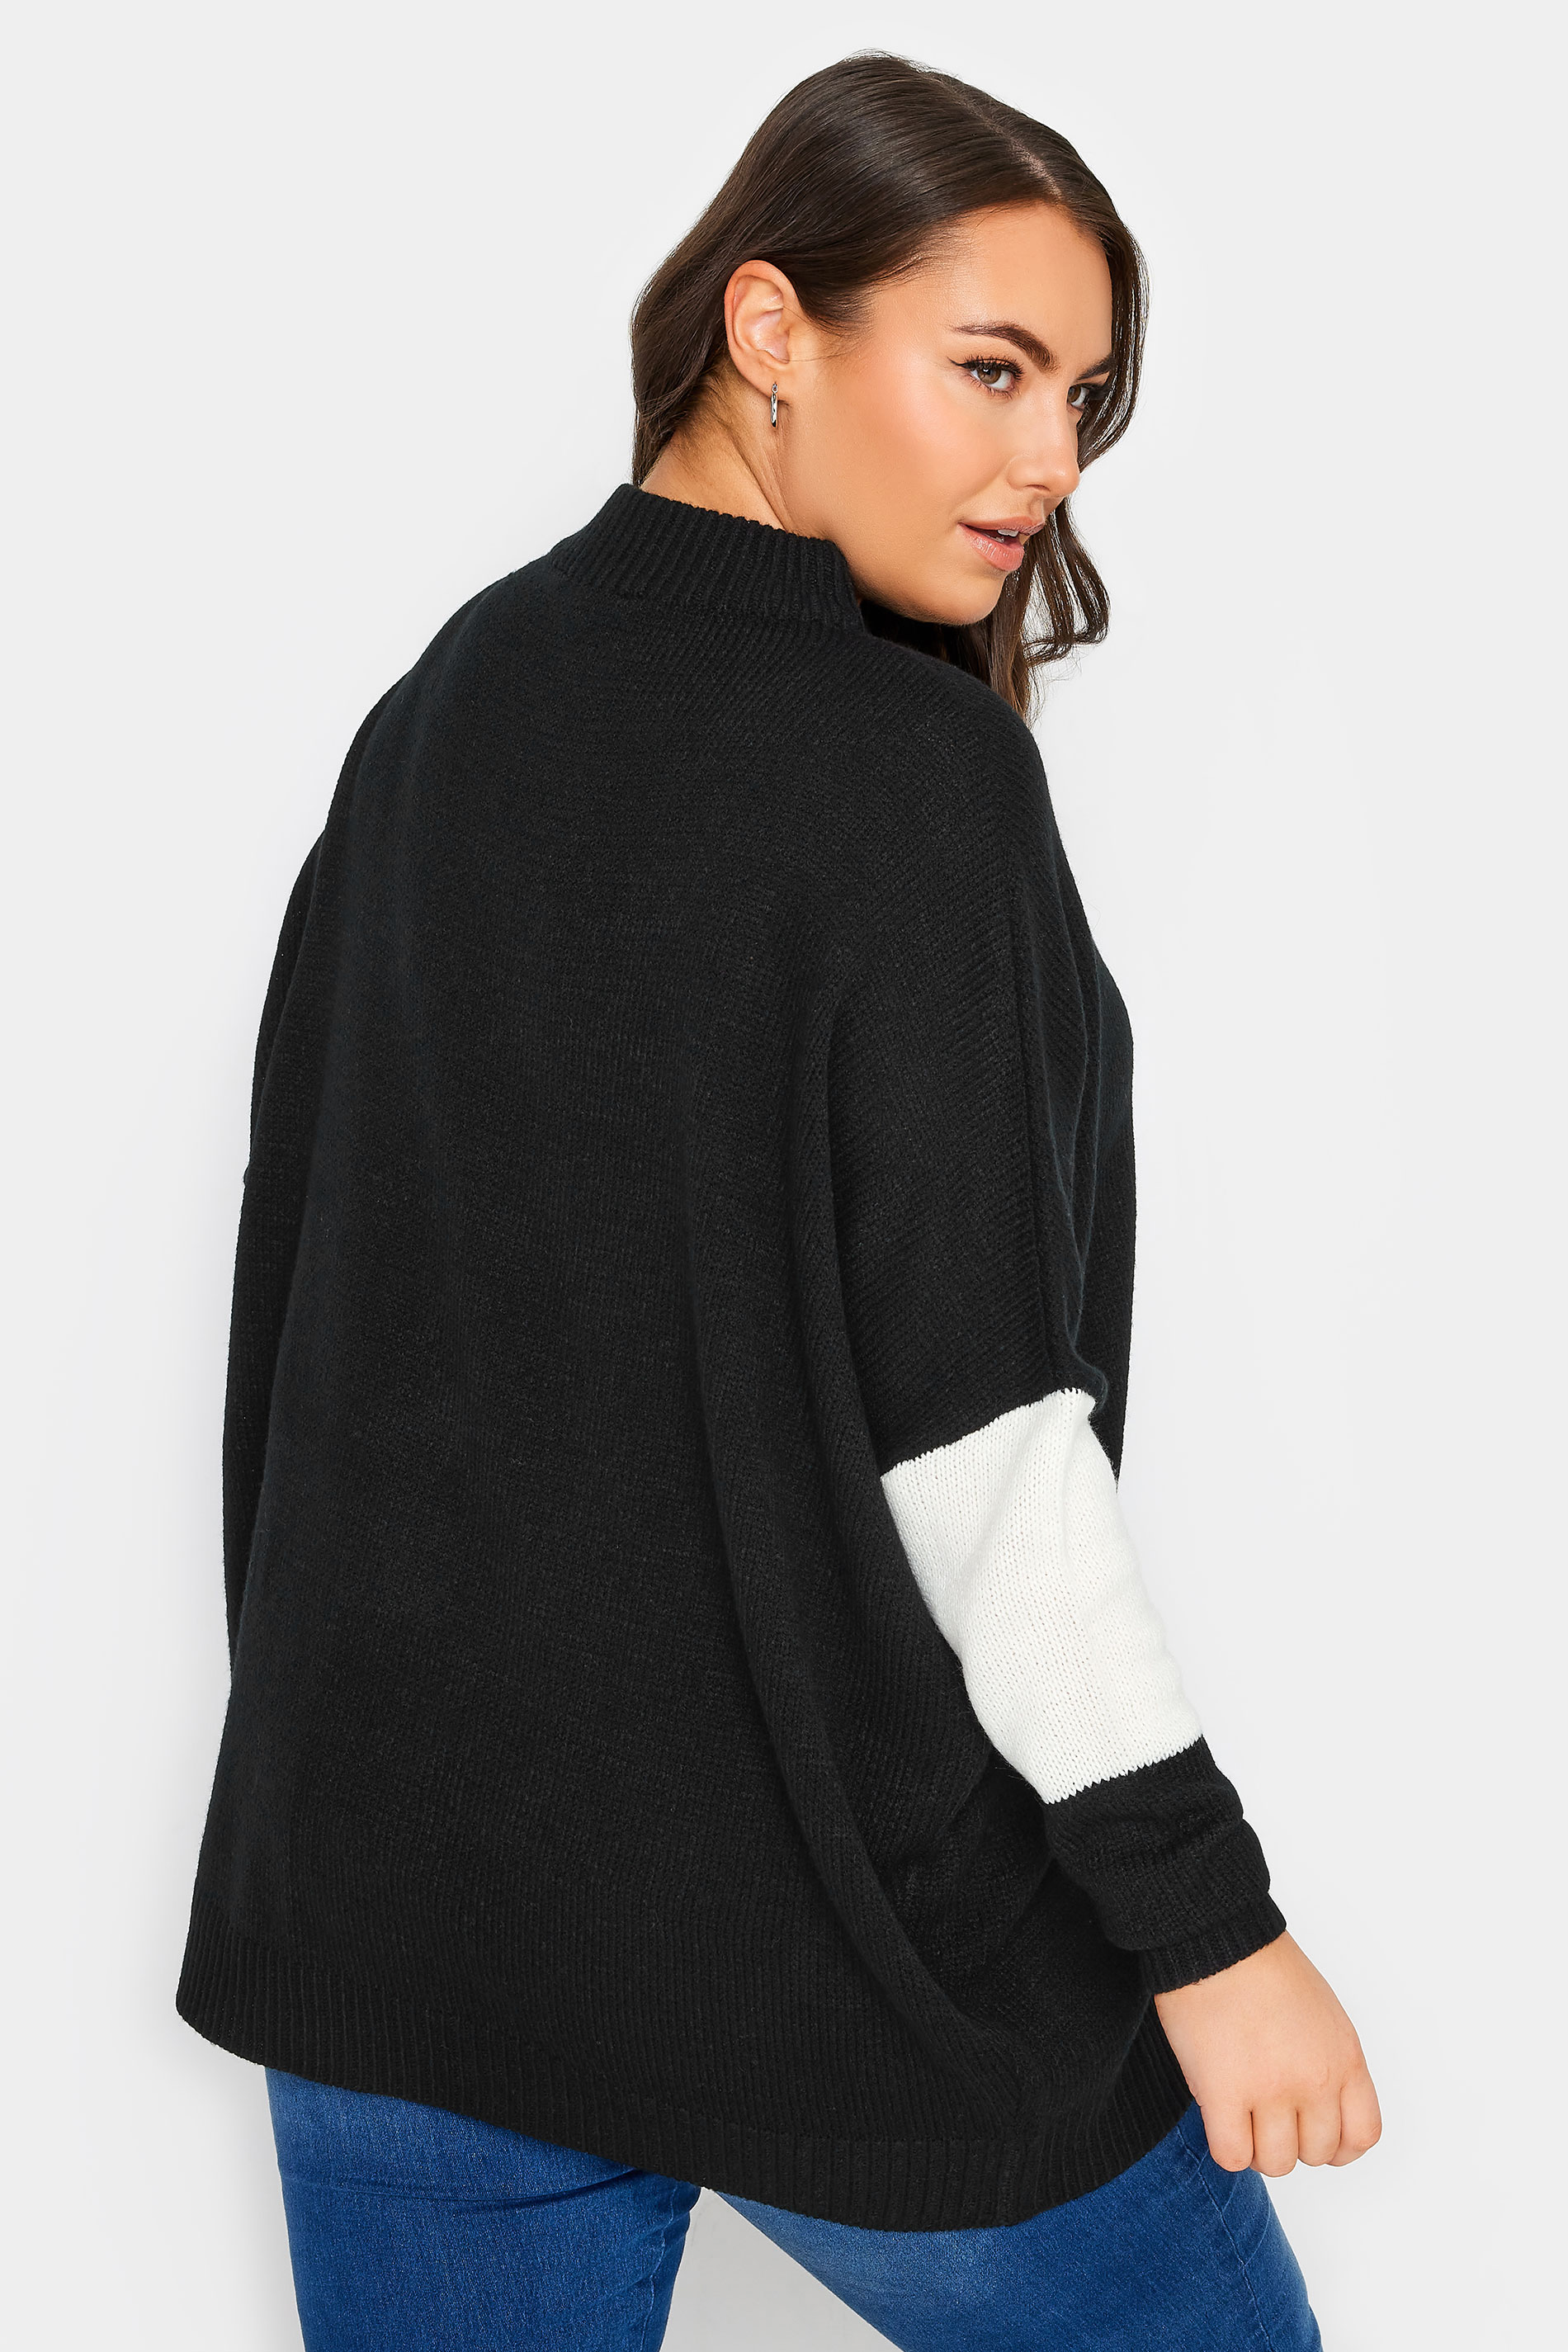 YOURS Plus Size Black & White Colourblock Knitted Jumper | Yours Clothing 3